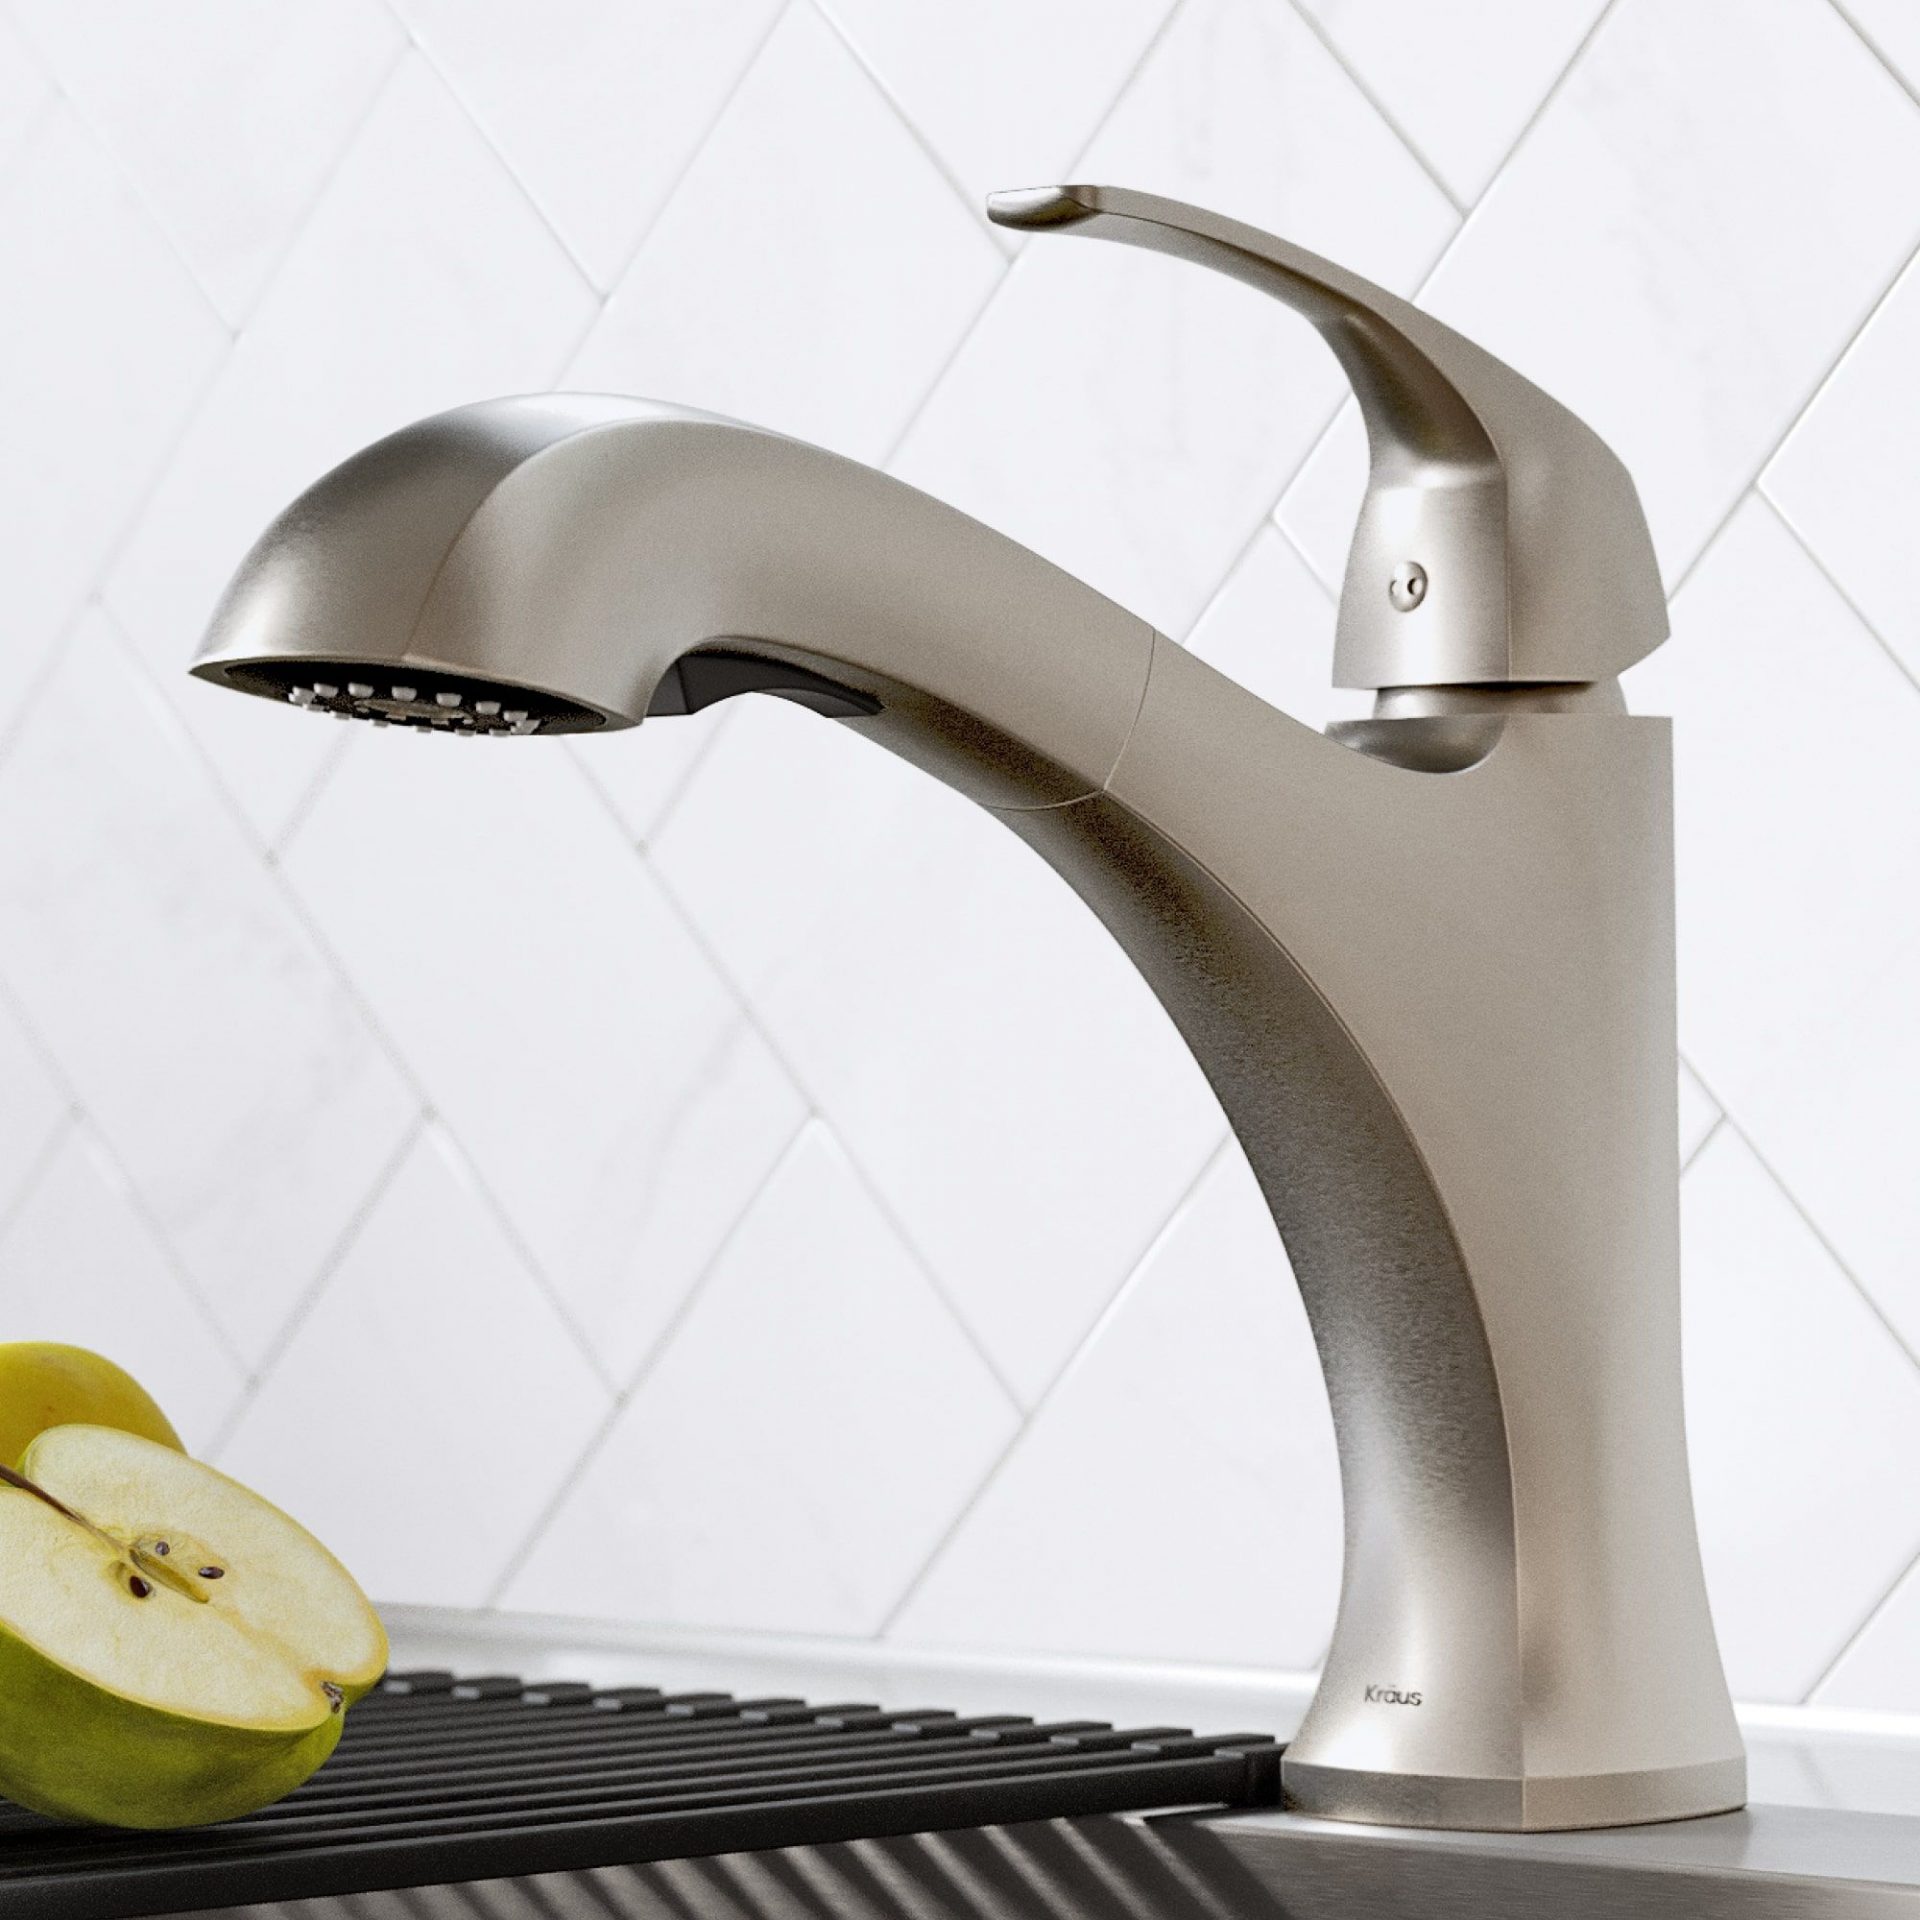 Are You Remodeling Your Kitchen? The Different Types of Kitchen Faucets to Choose From